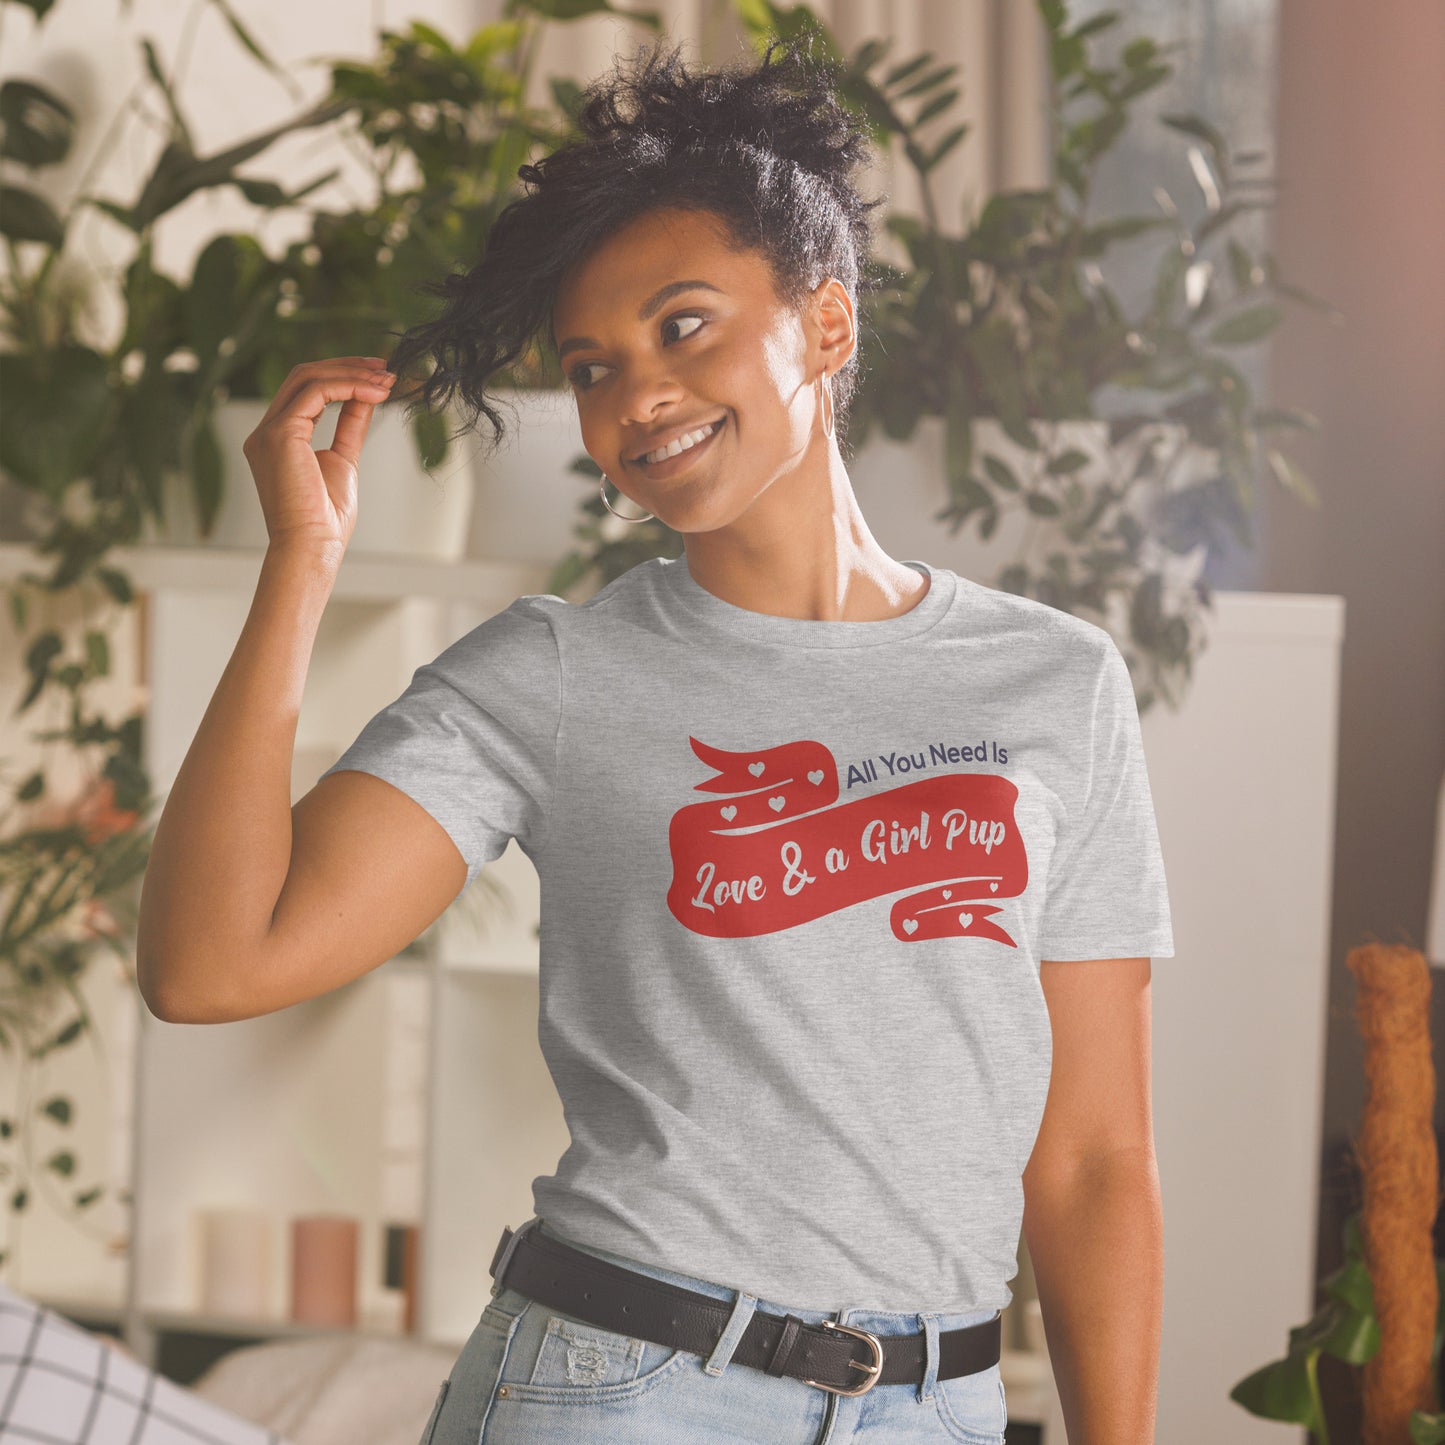 All You Need Is Love & A Girl Pup (short-sleeve unisex t-shirt)